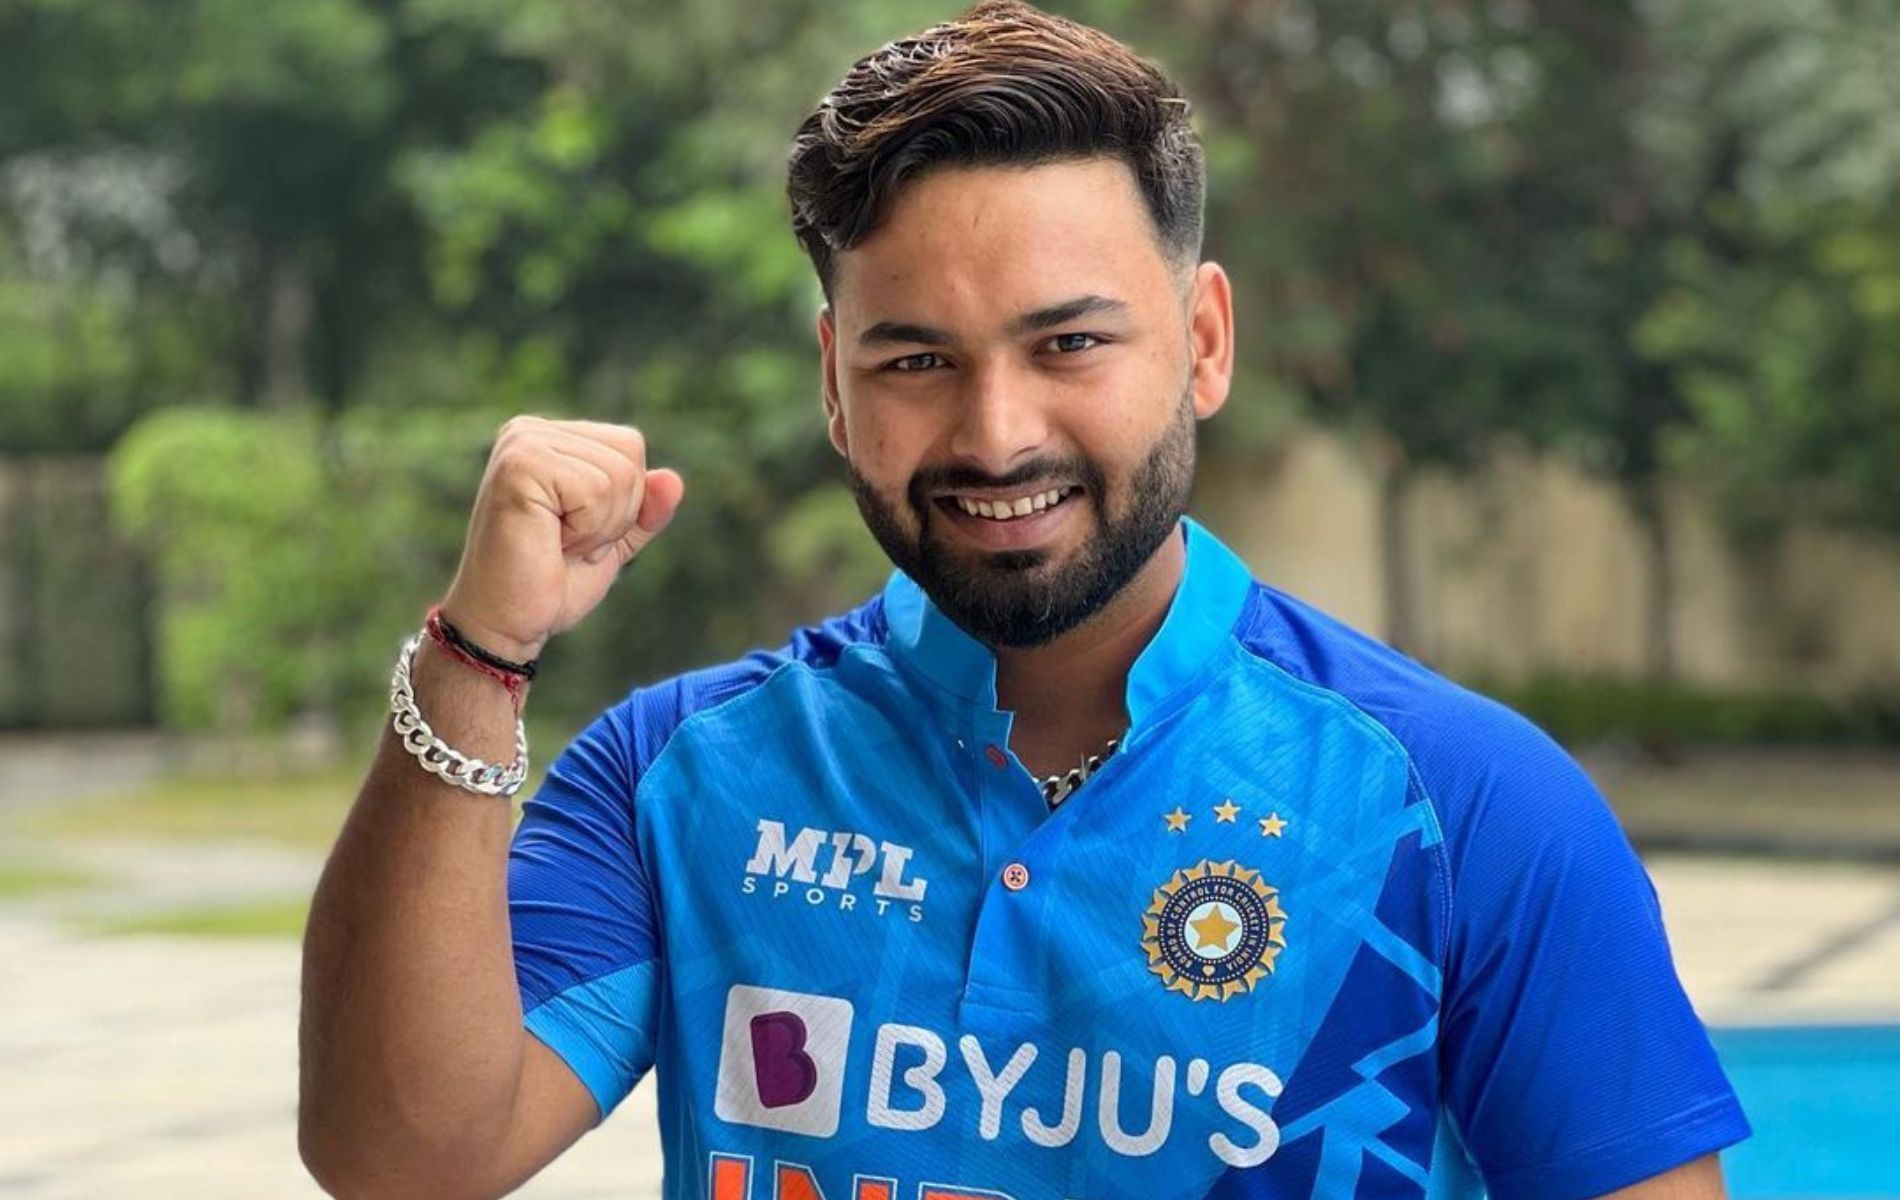 Rishabh Pant failed to make an impact with the bat against Zimbabwe. (Pic: Instagram)